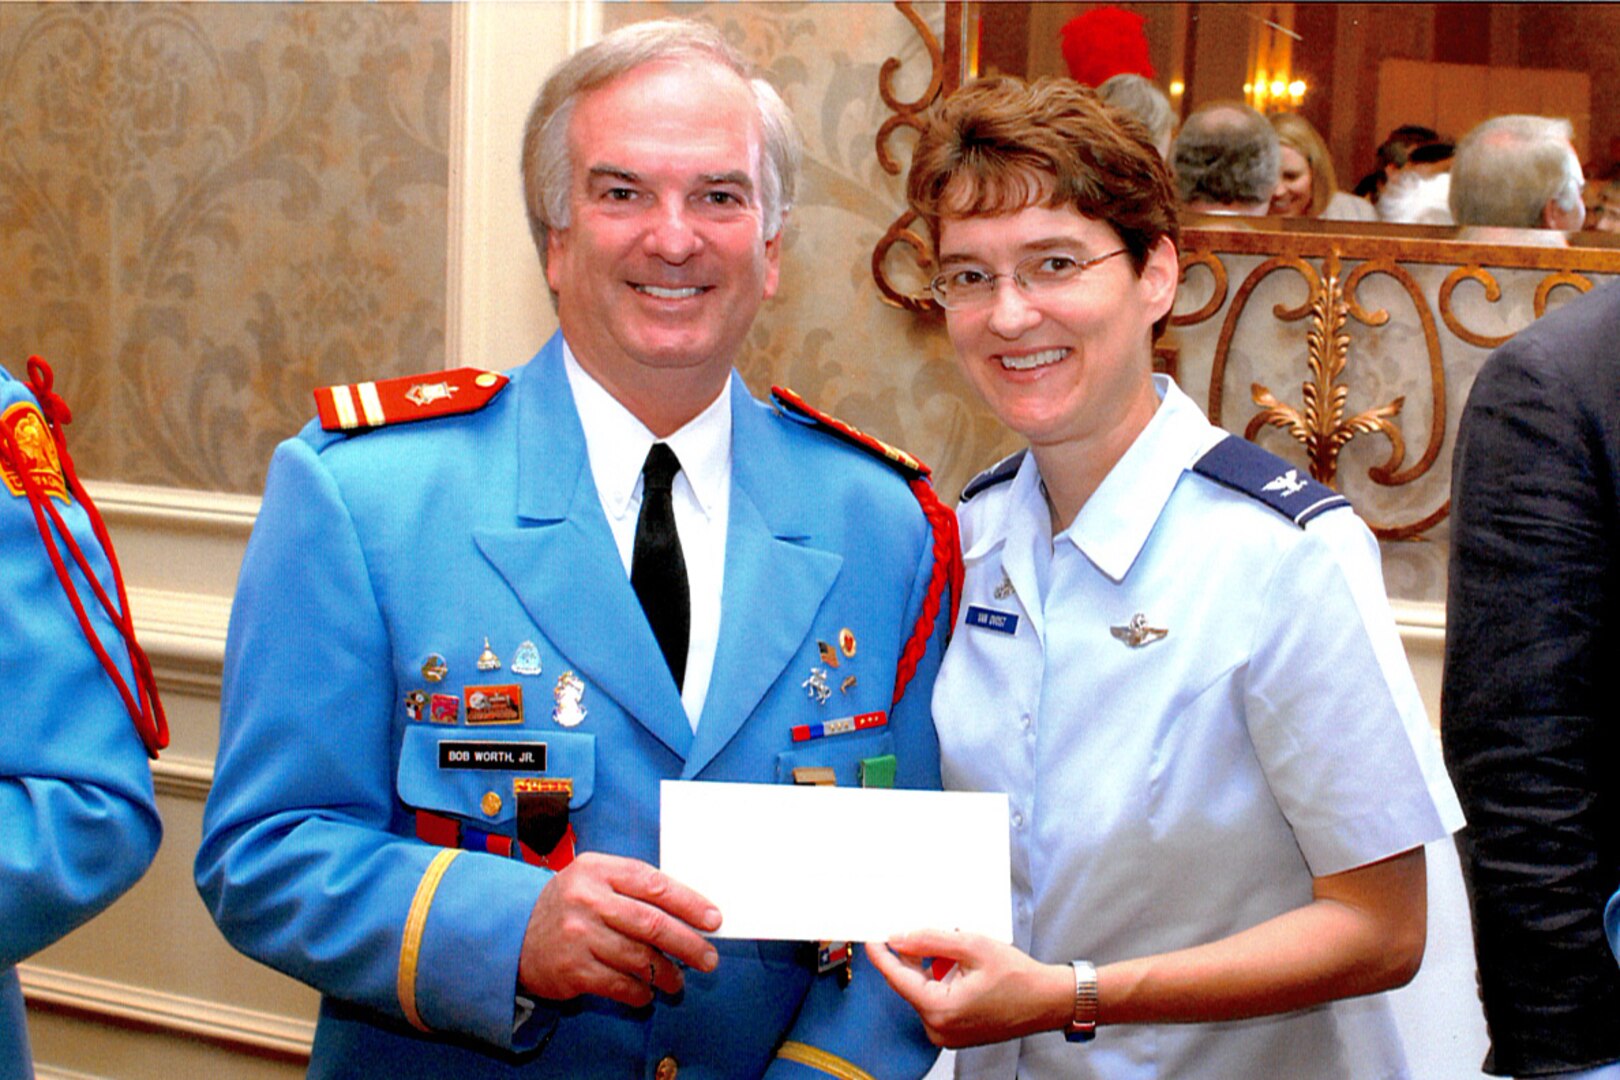 Col. Jacqueline Van Ovost, 12th Flying Training Wing commander, accepts a $5,000 grant from Bob Worth, Jr., an official from the Texas Cavaliers Foundation, for the "Friends of the Family Support Center" fund during a Fiesta 2008 celebration April 21. (U.S. Air Force photo by Don Lindsey)